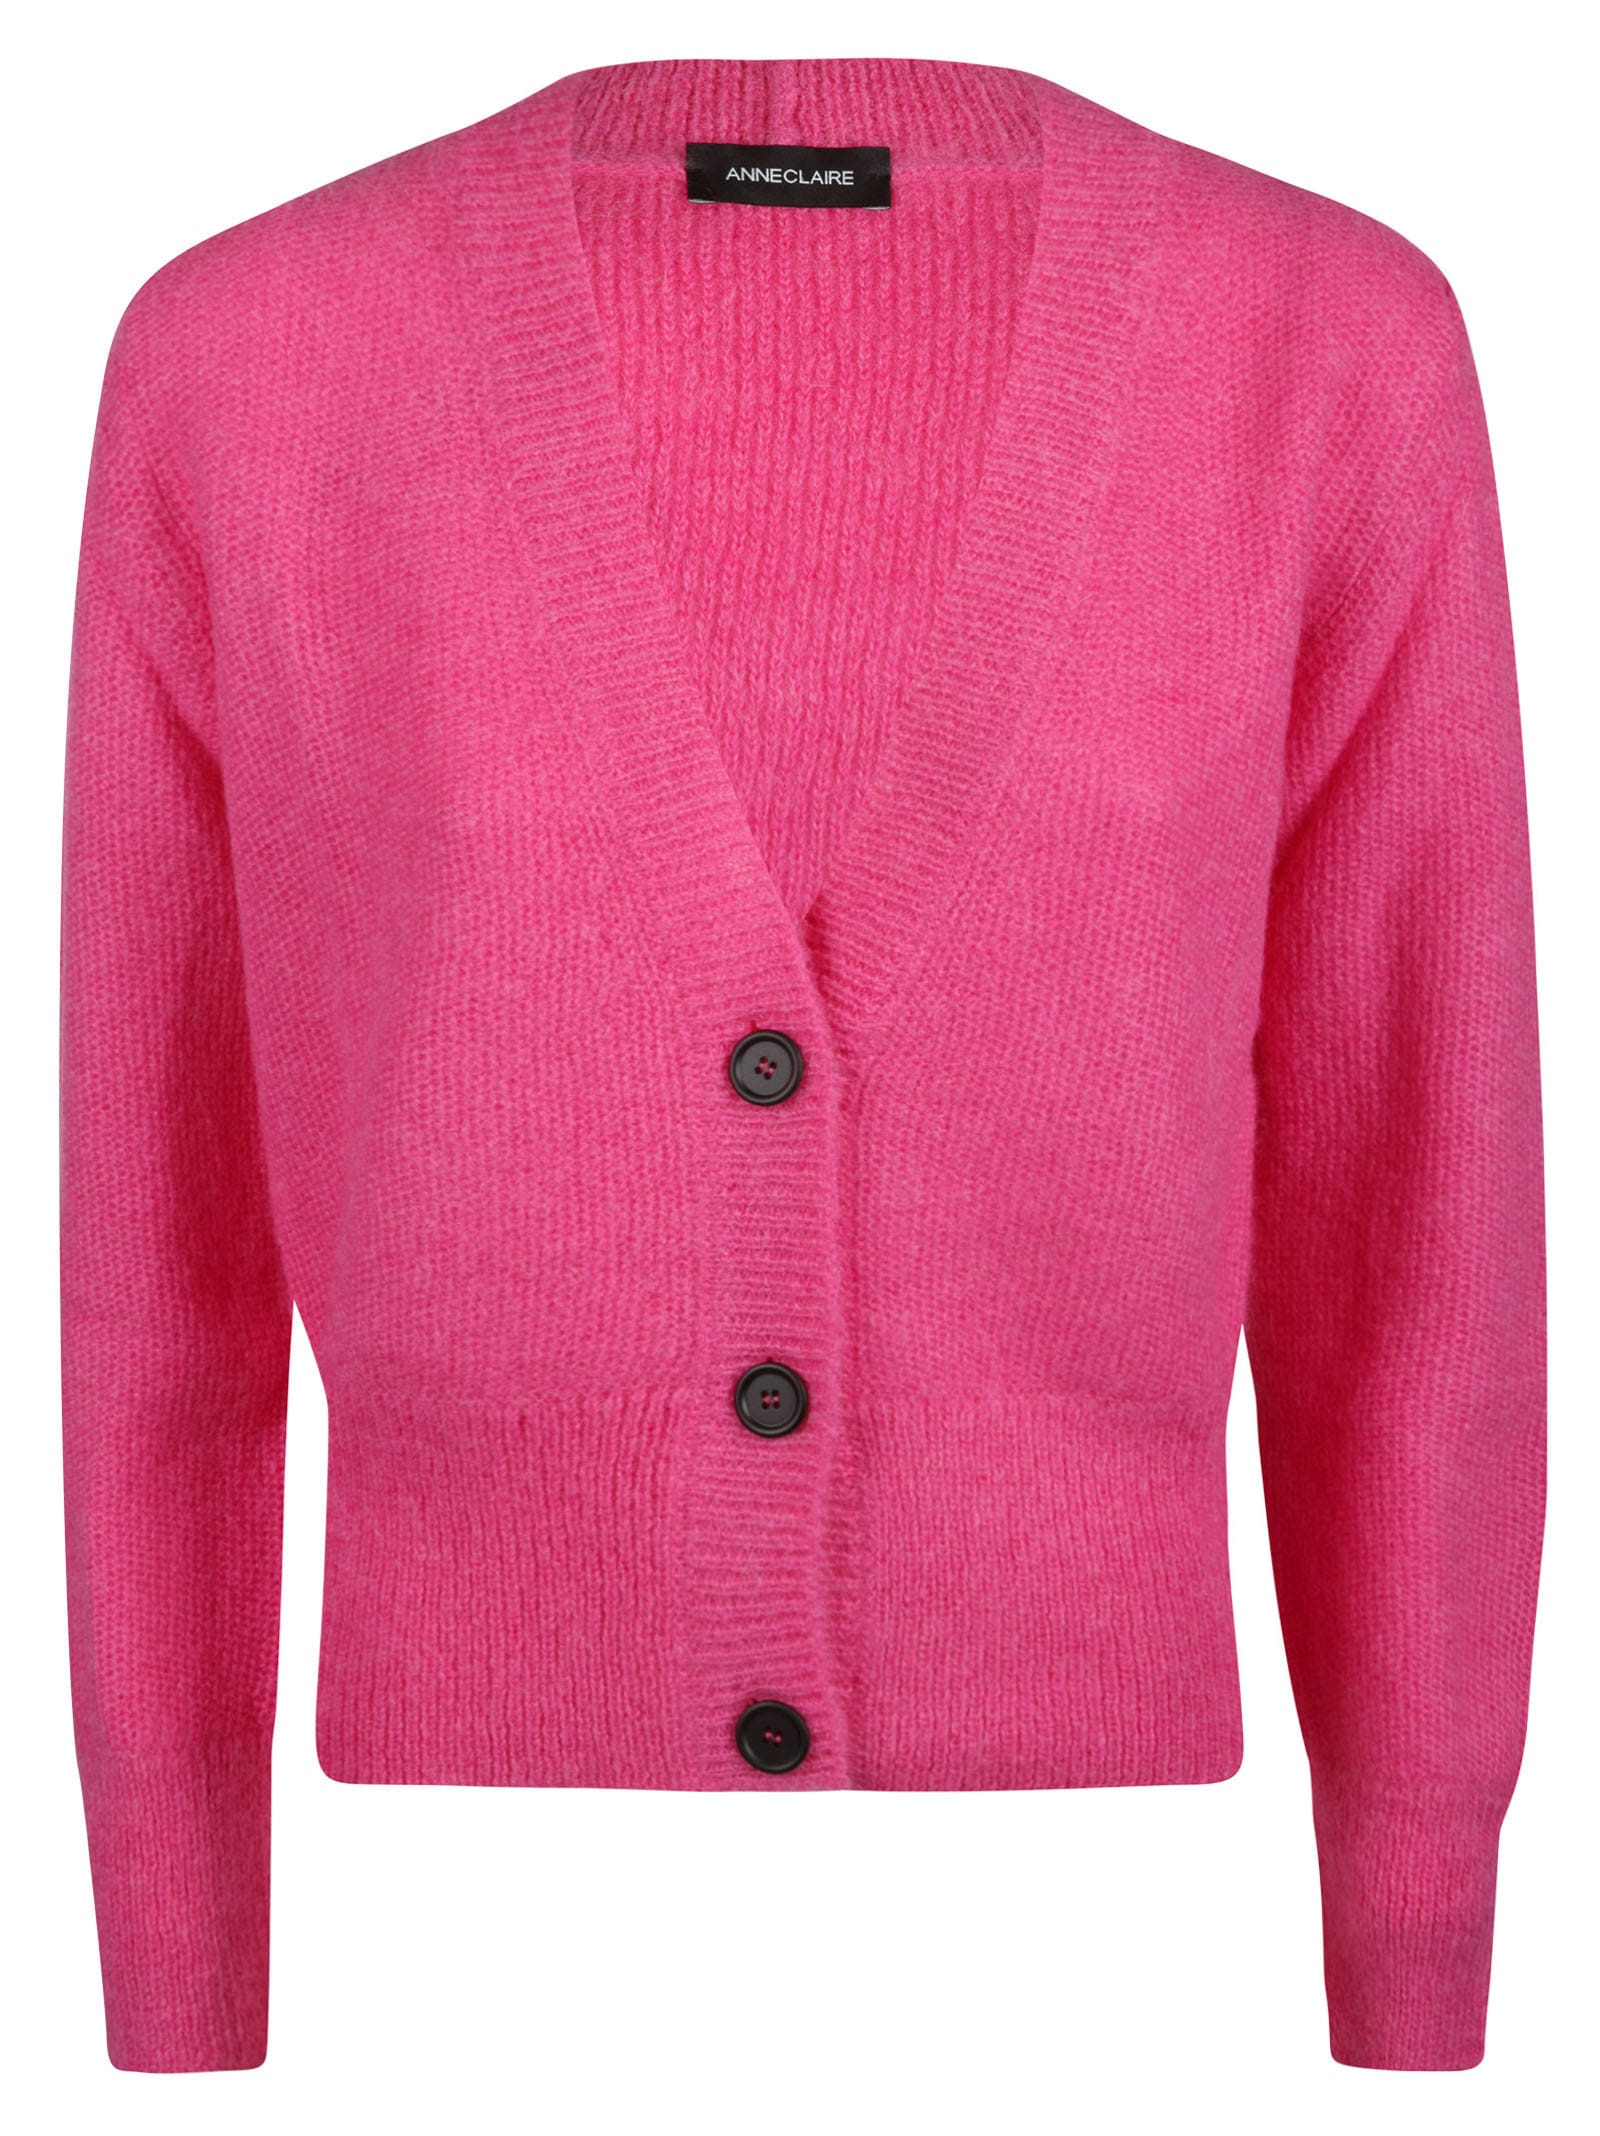 Anneclaire Plain Ribbed Cardigan